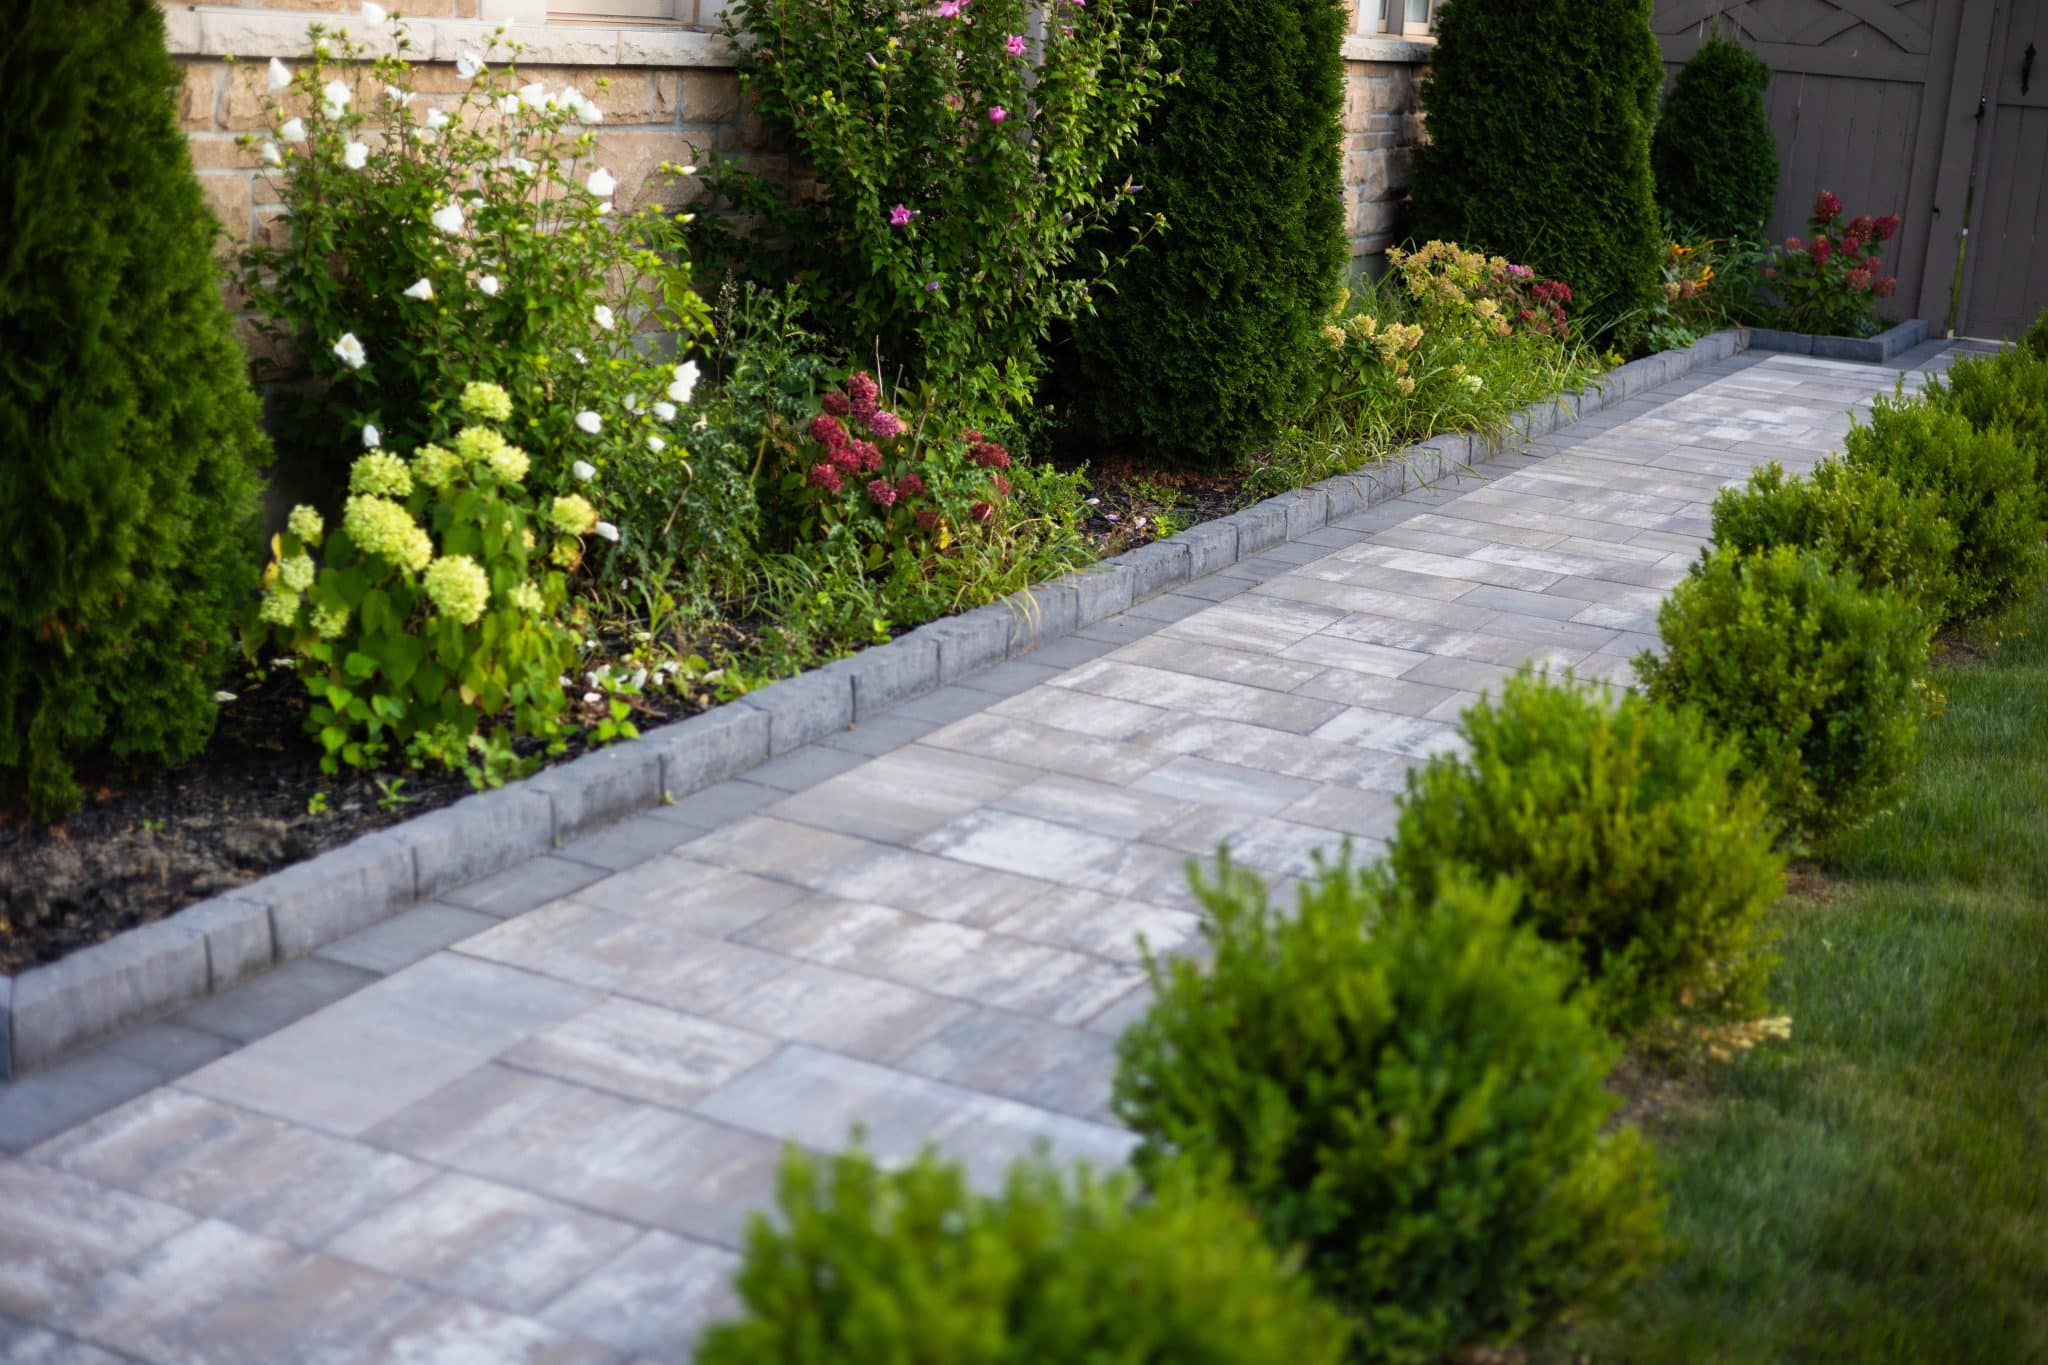 The best landscaping services in Thornhill by experienced contractors Avanti Landscaping